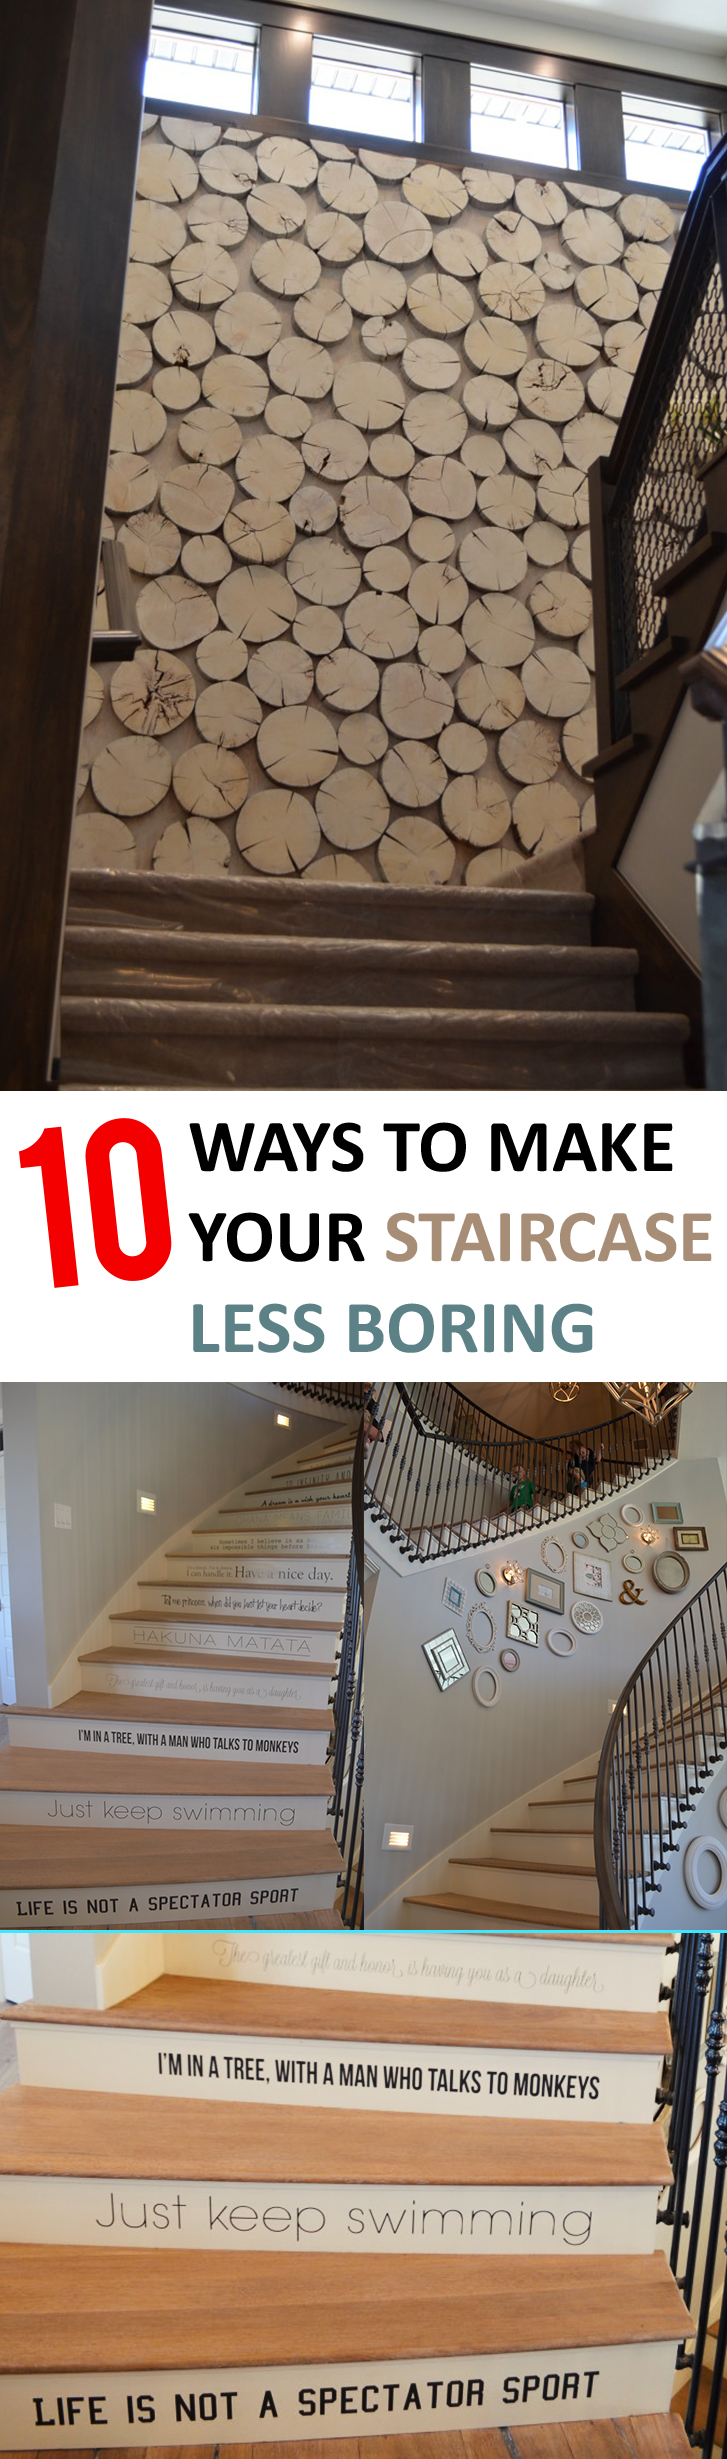 10 Ways to Make Your Staircase Less Boring